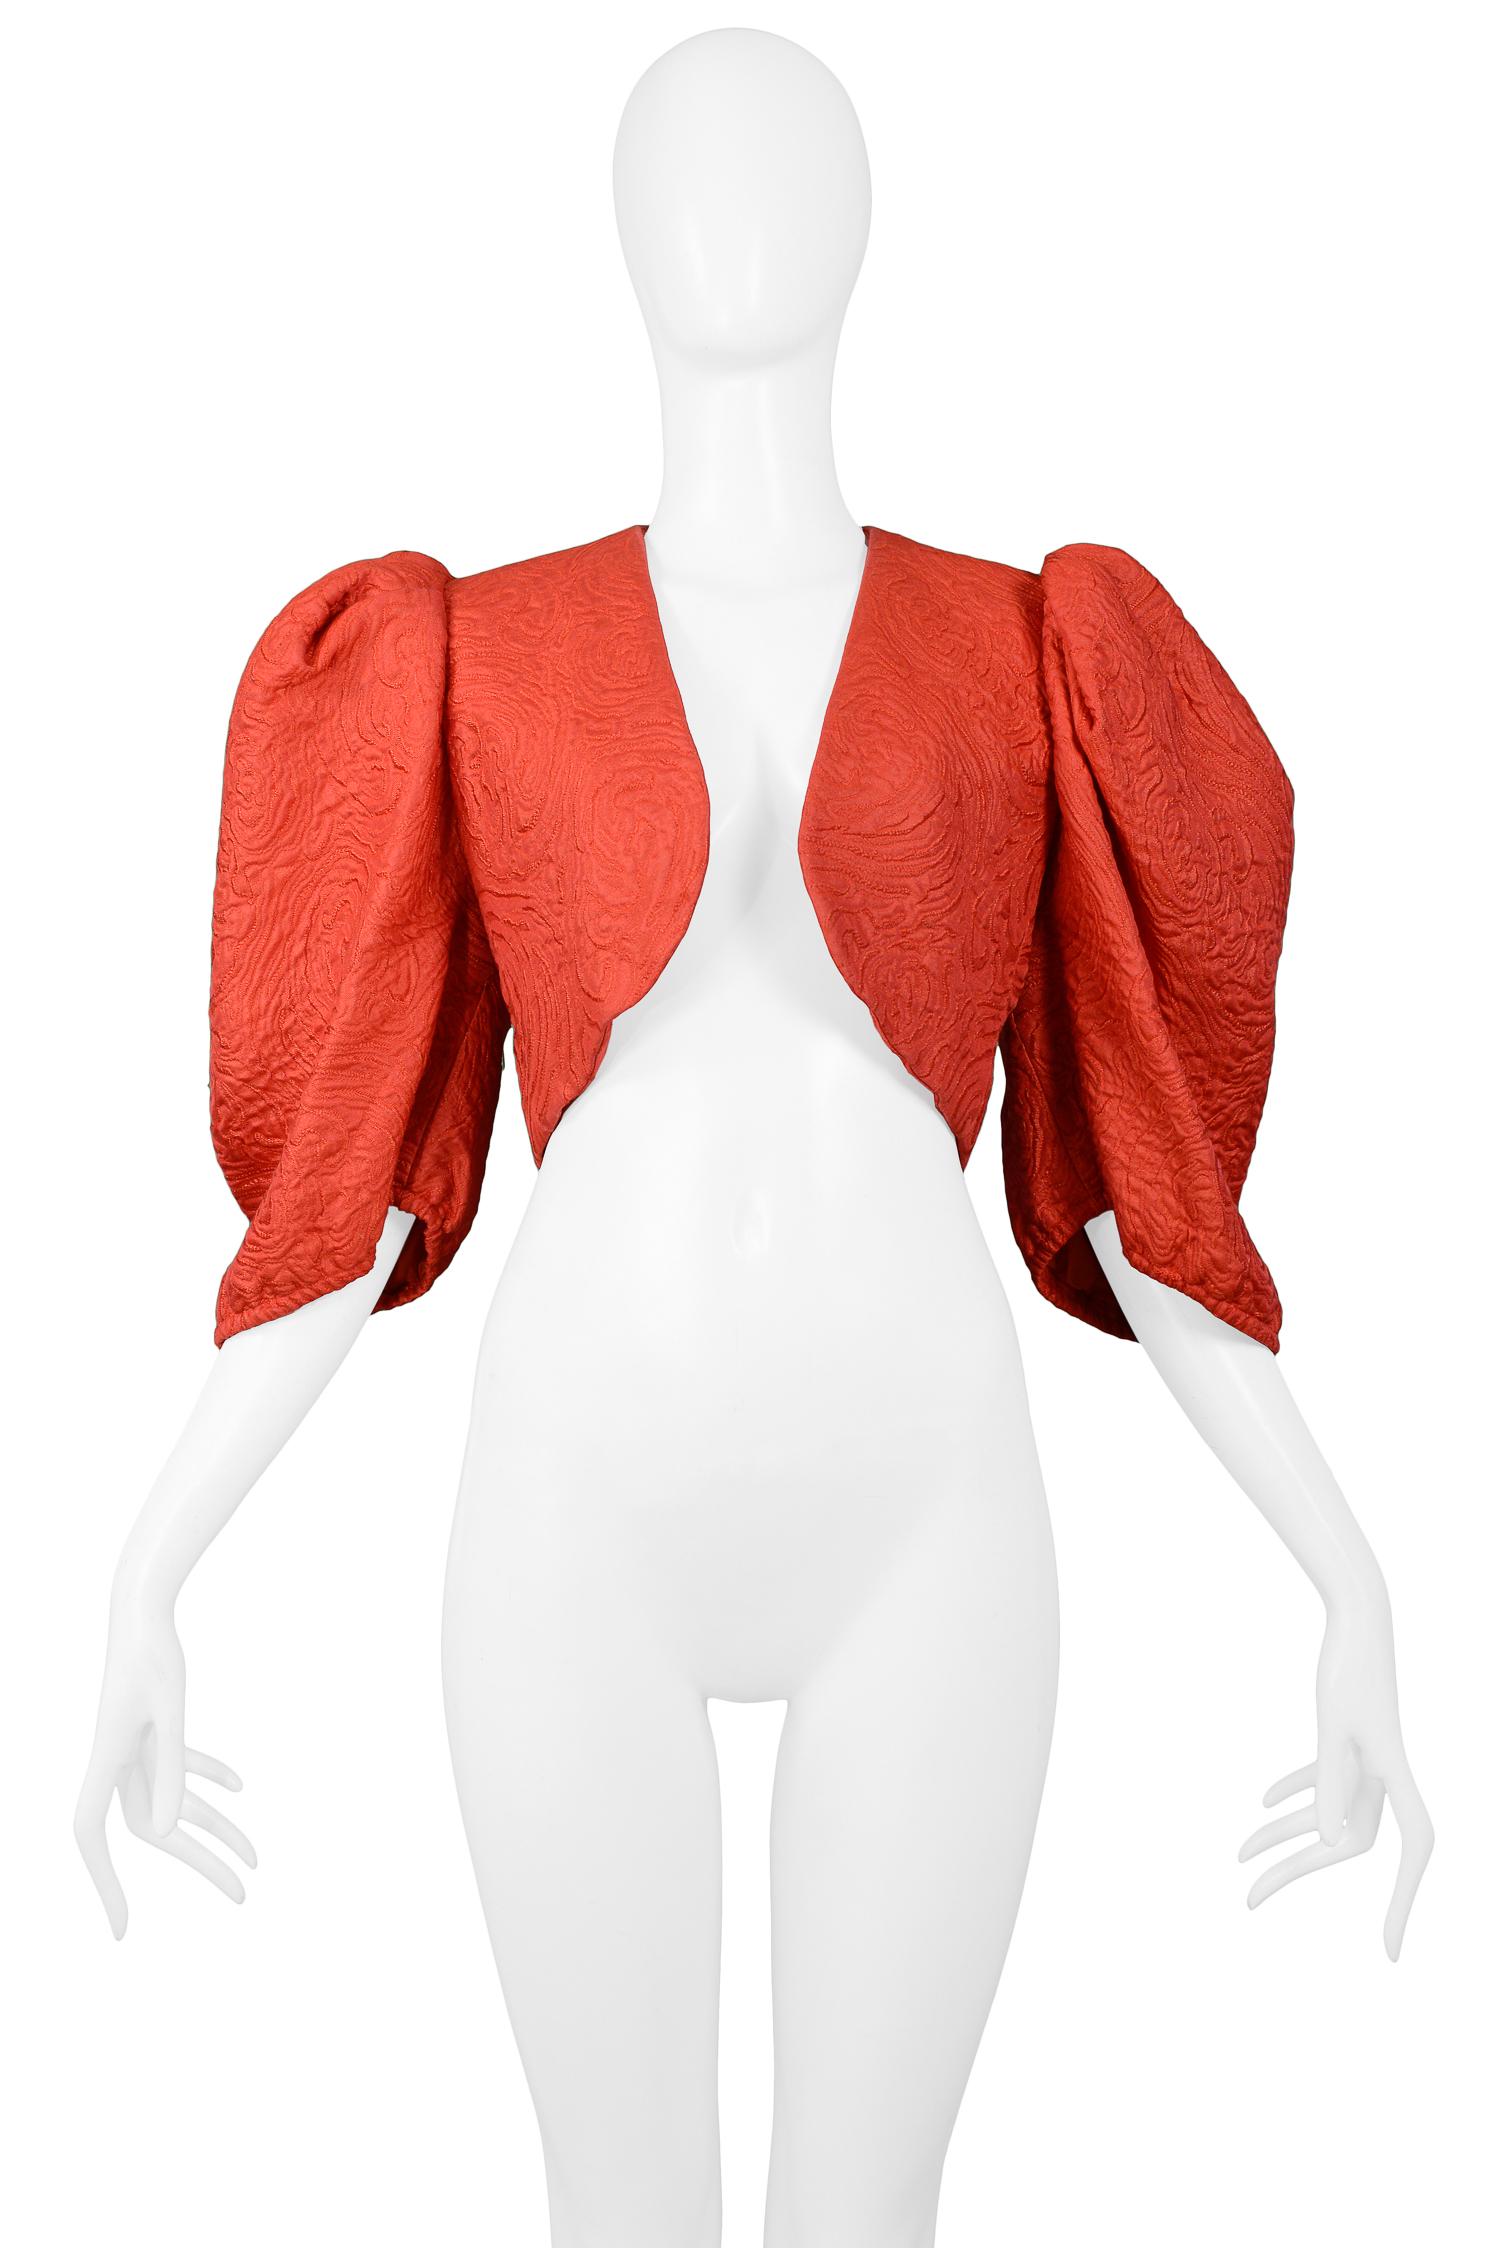 Vintage Yves Saint Laurent red fancy open front bolero jacket in jacquard fabric with dramatic puff sleeves.

Excellent Vintage Condition.

Size: 40

Measurements:
Shoulder 14